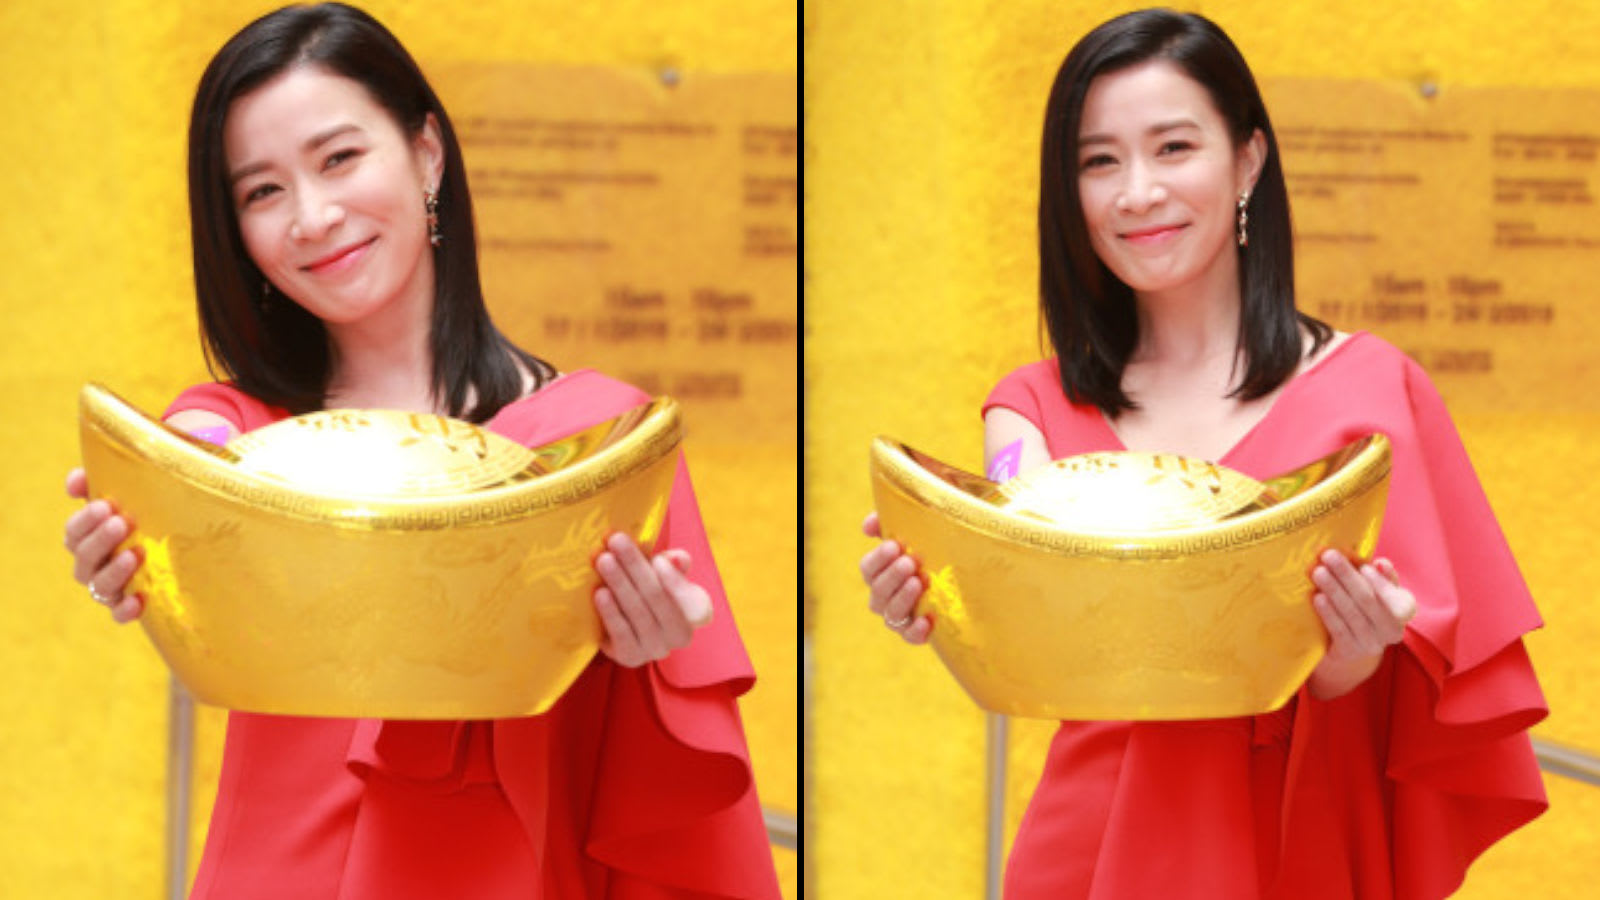 Charmaine Sheh may have to work over the New Year